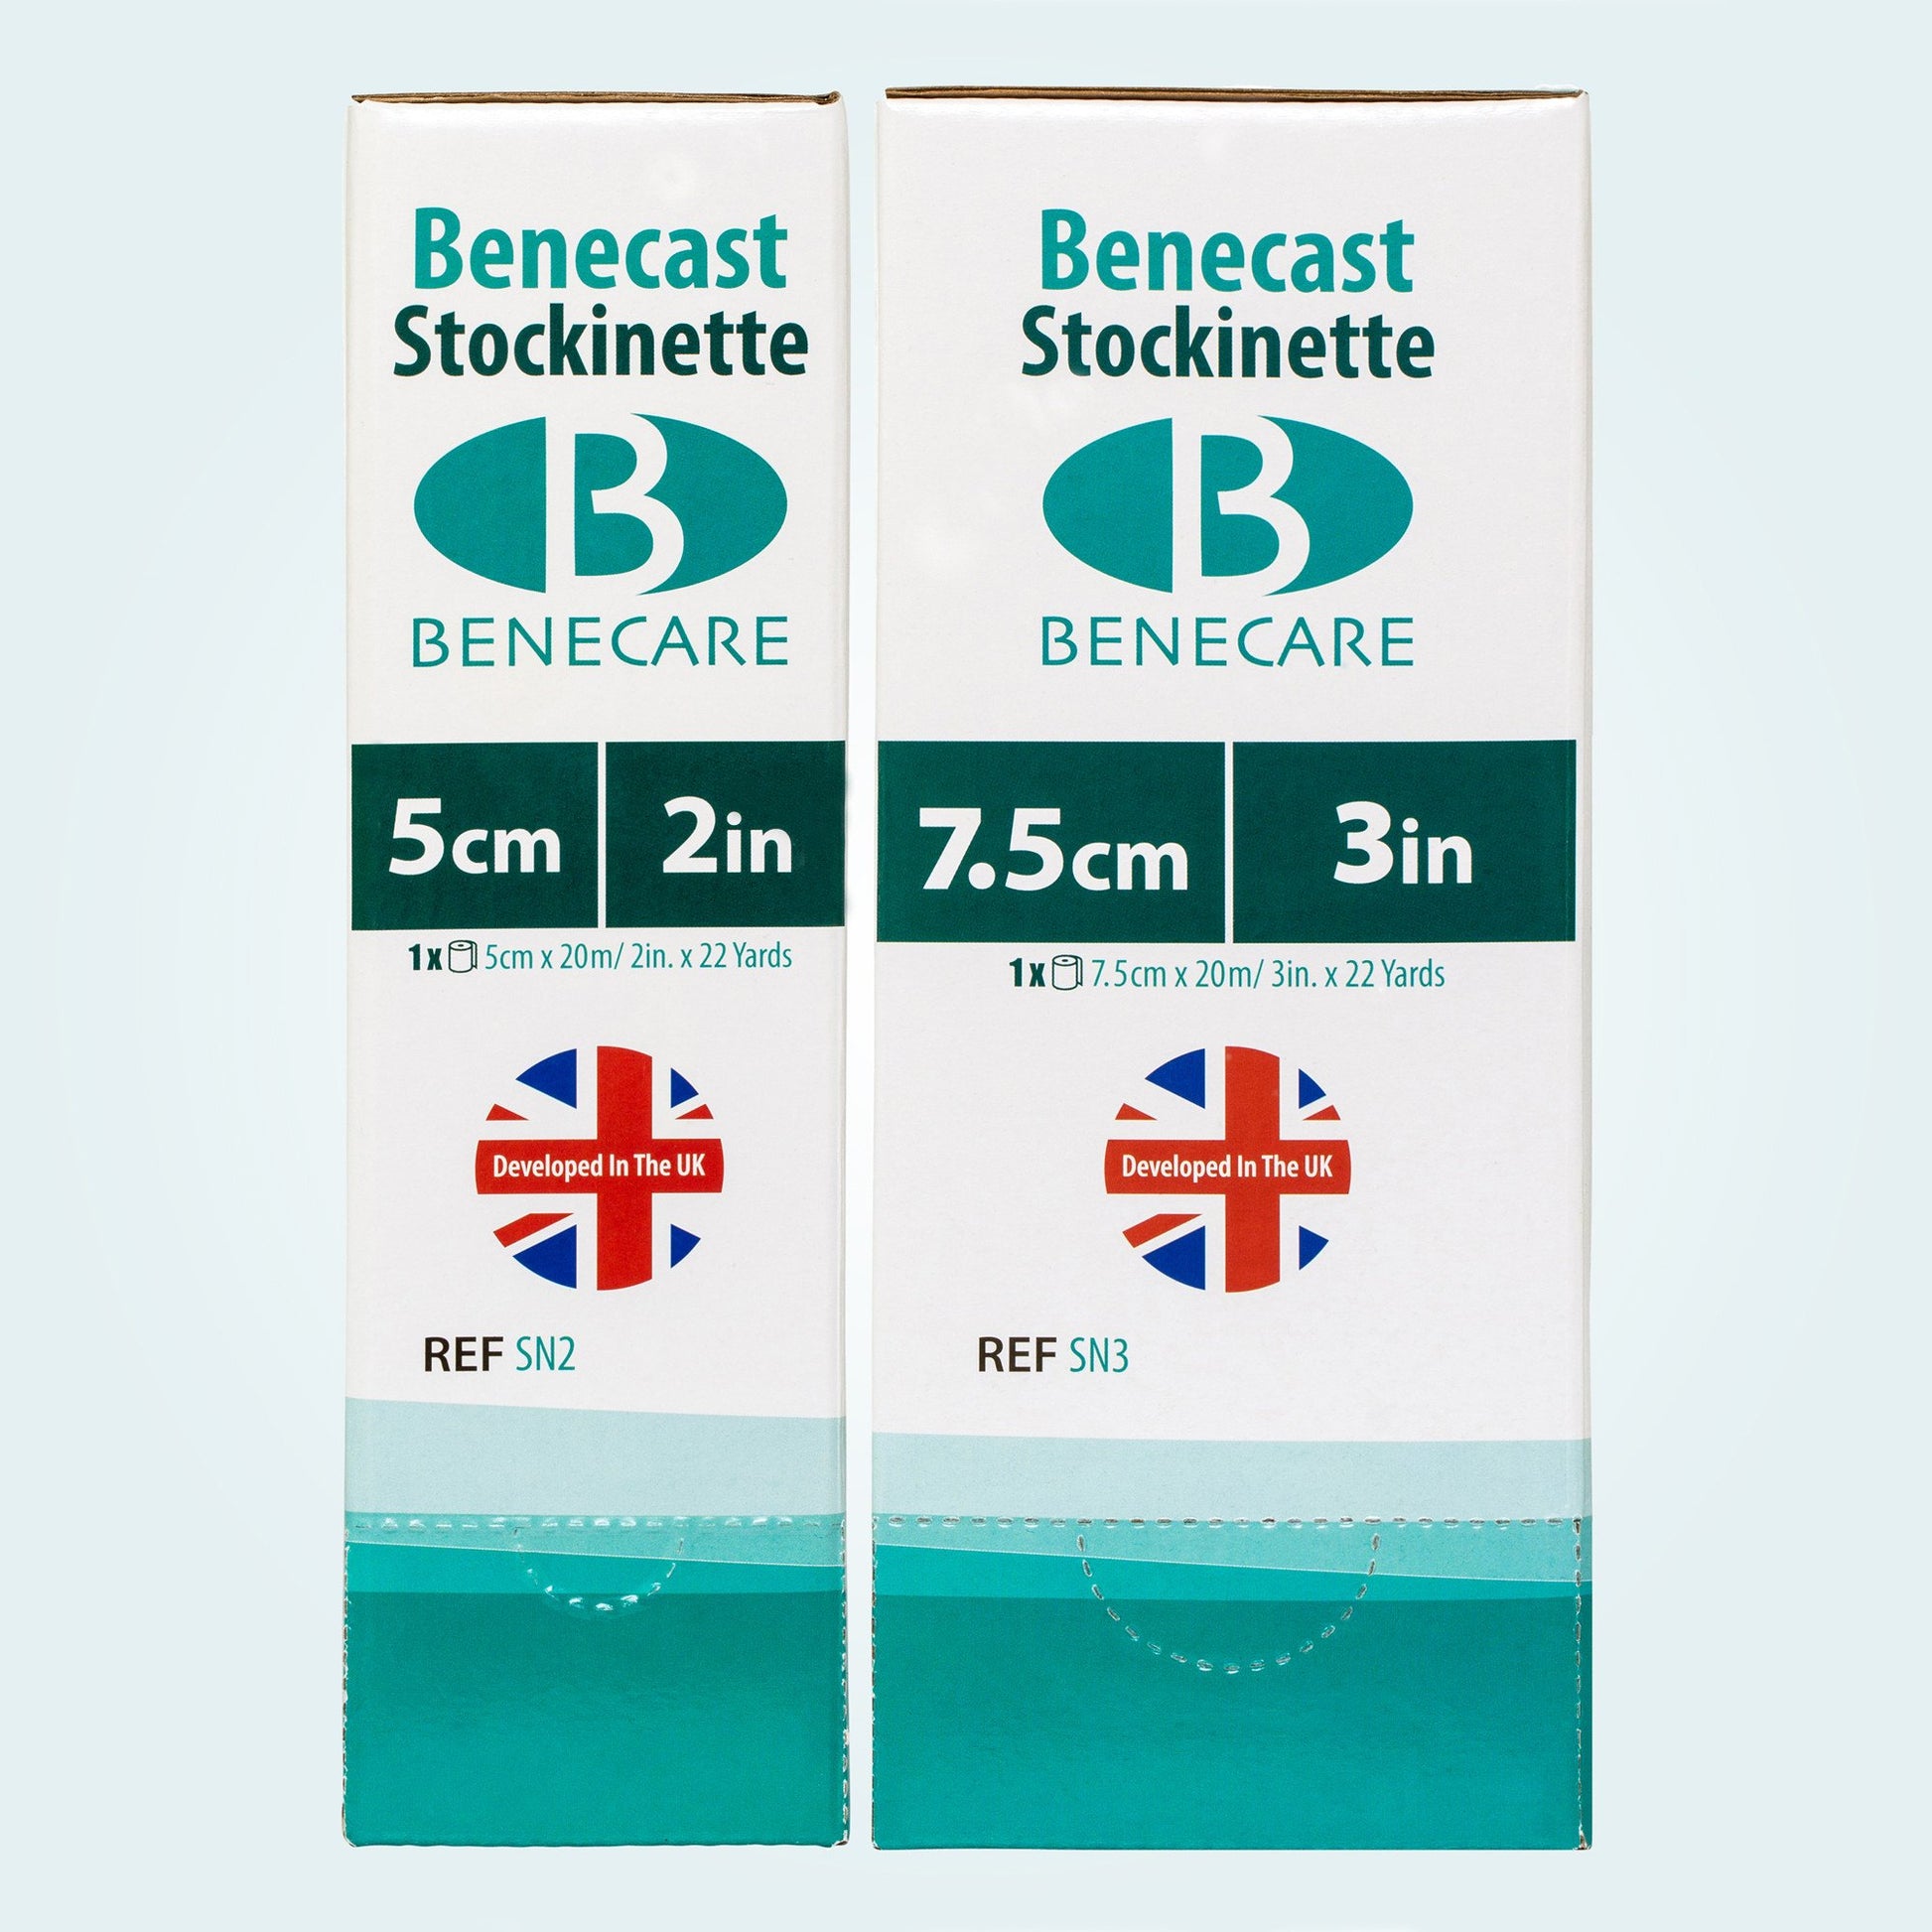 Benecast Cotton Ribbed Stockinette is available in a variety of sizes.